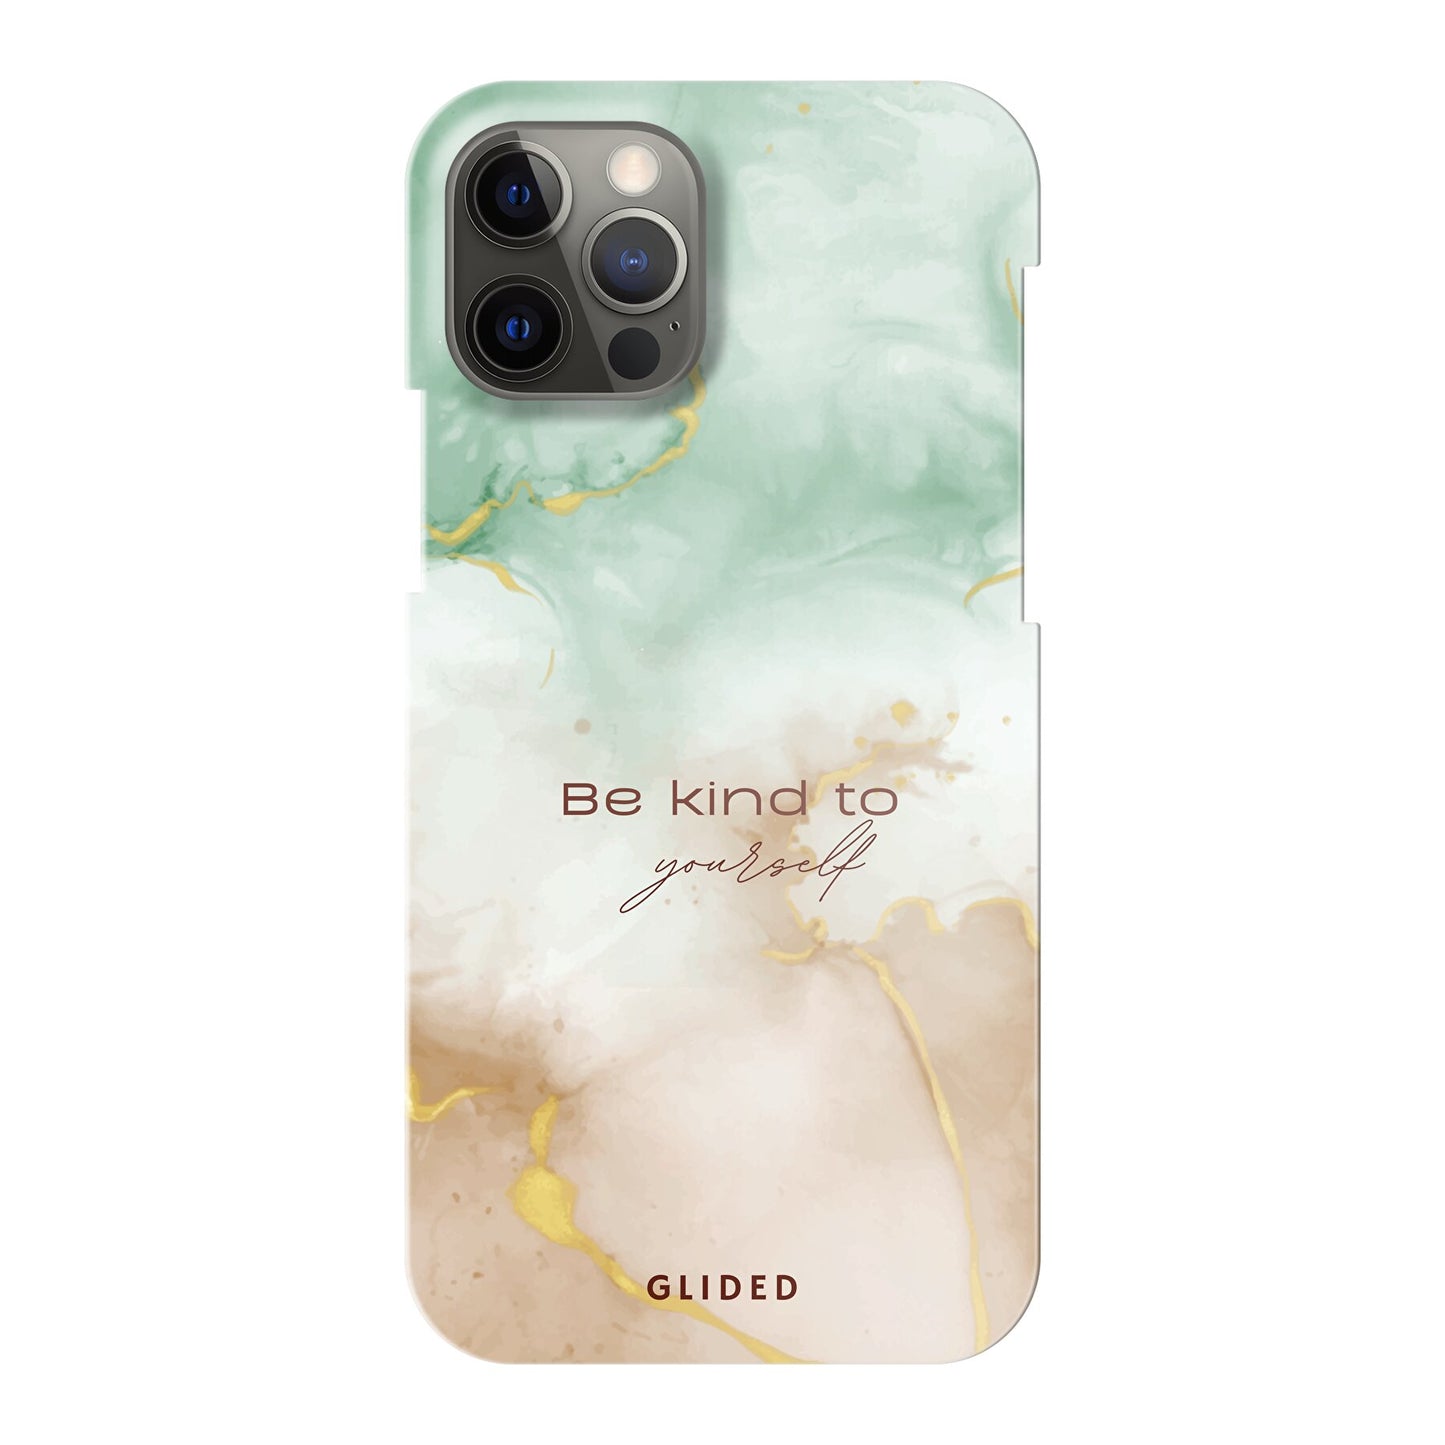 Kind to yourself - iPhone 12 Handyhülle Hard Case